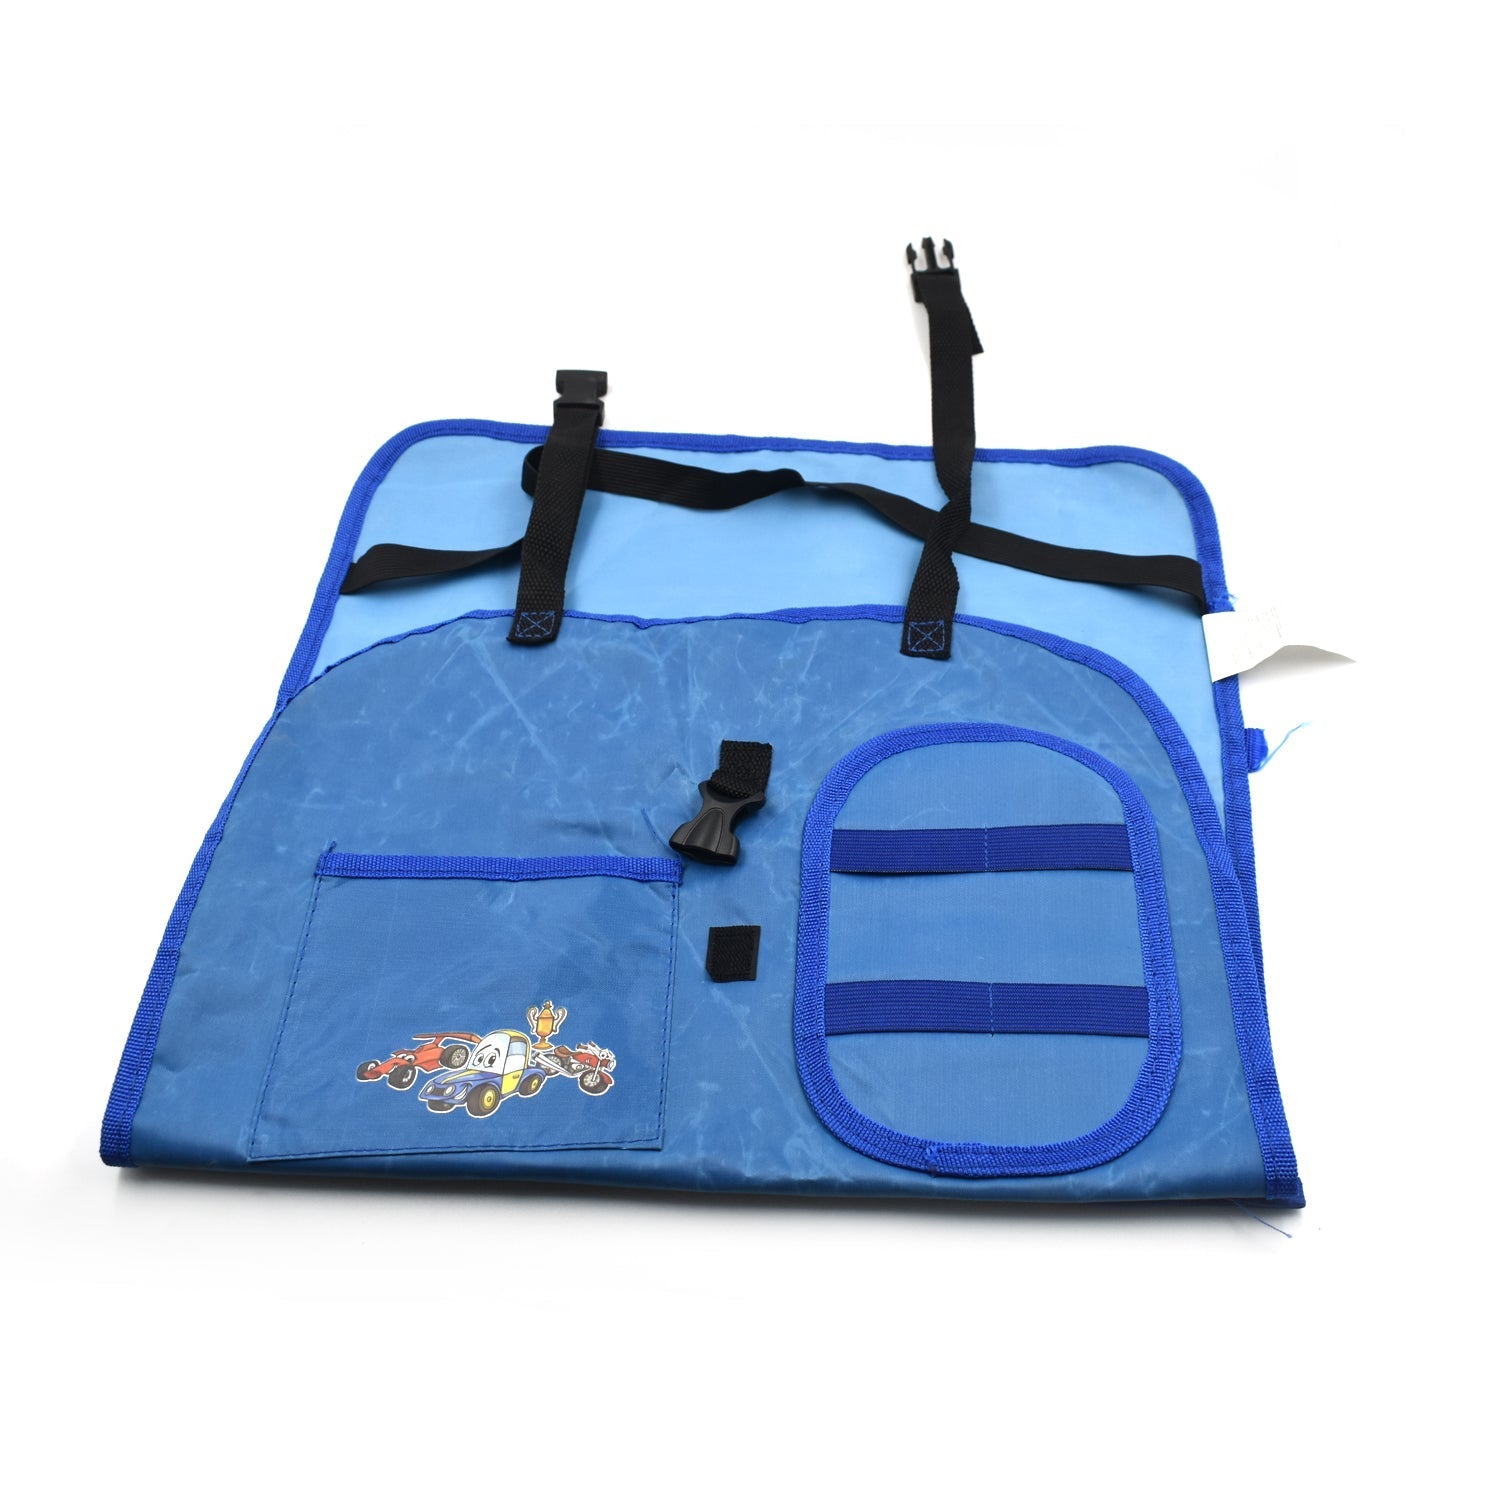 6302 Car Back Seat Organiser used in all types of cars with their car seats to cover them easily.